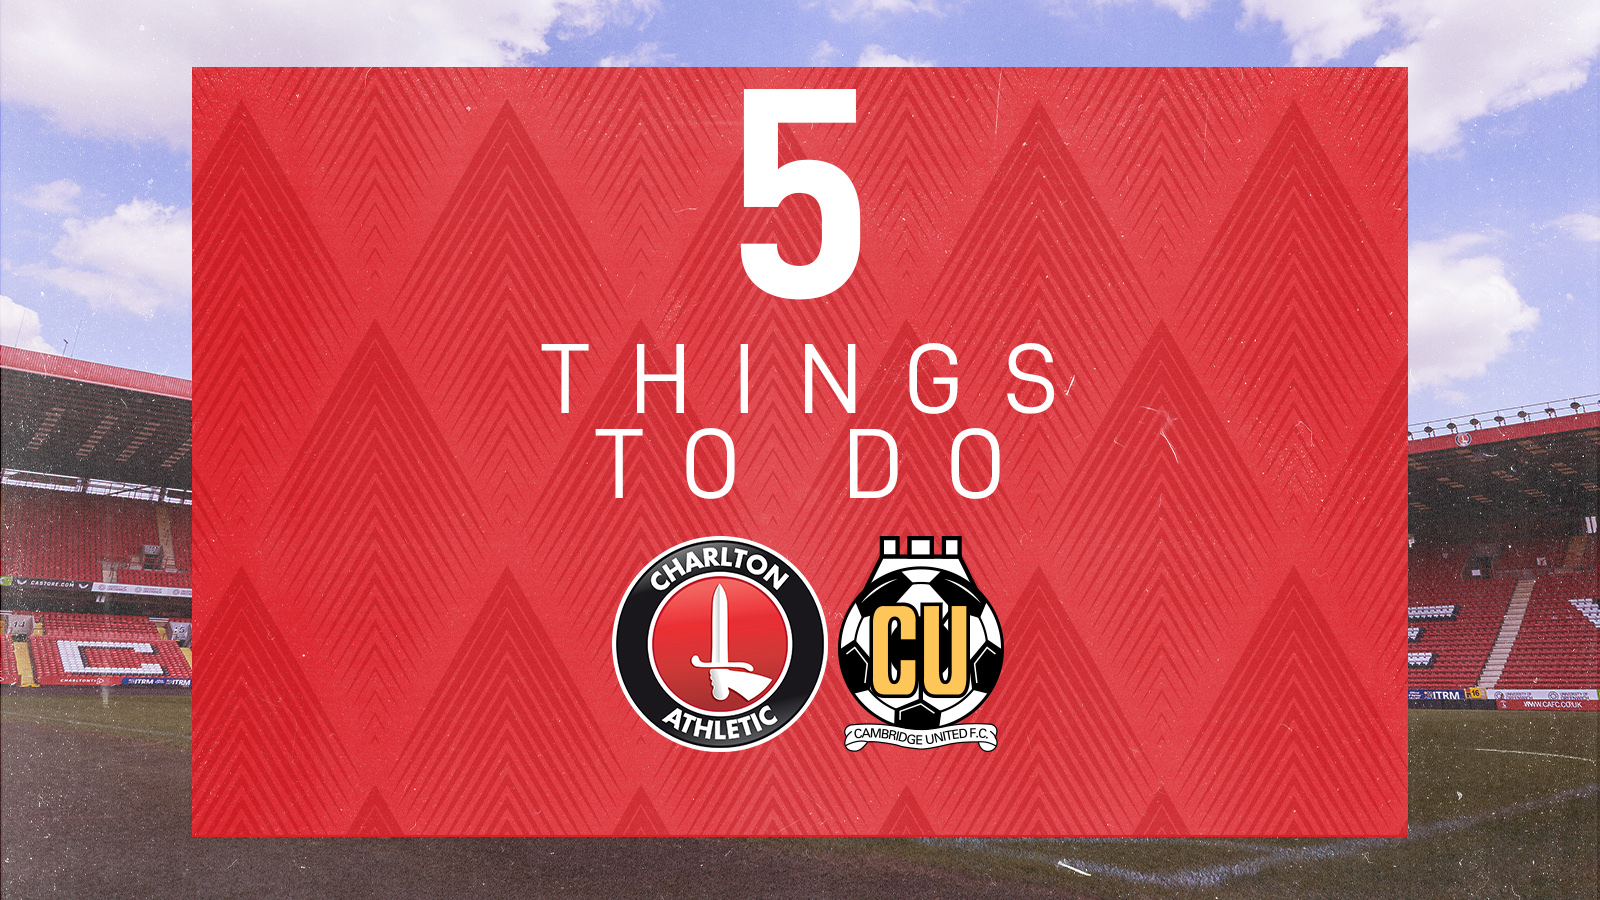 CAMBRIDGE 5 THINGS TO DO